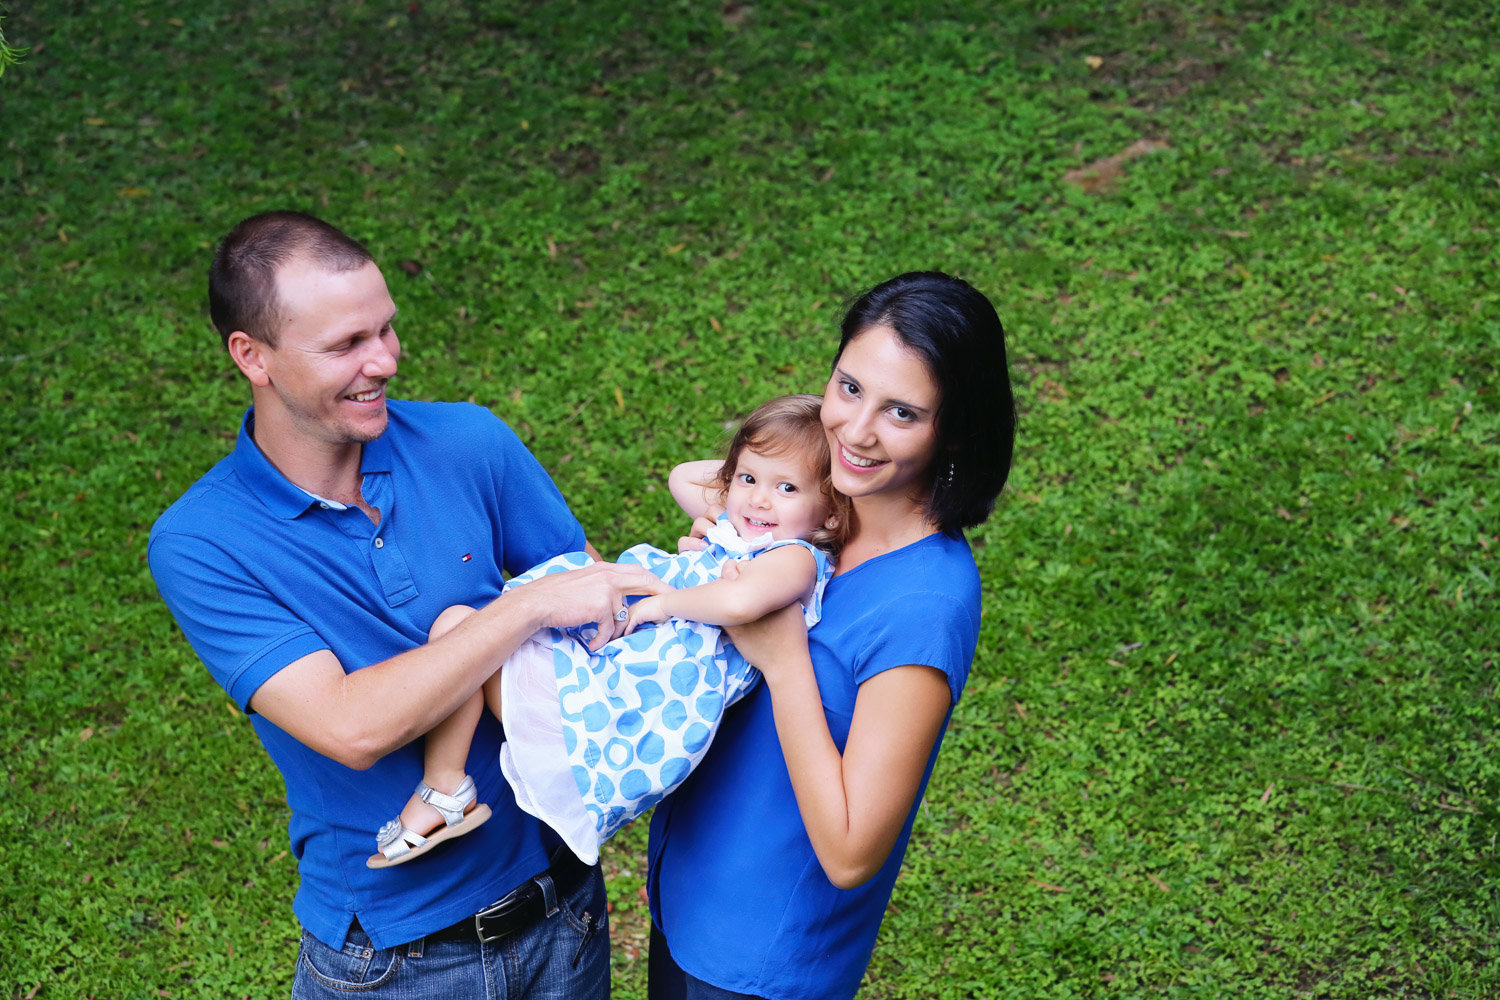 Mom and dad hold daughter while dressed in blue. Photo by Ross Photography, Trinidad, W.I..